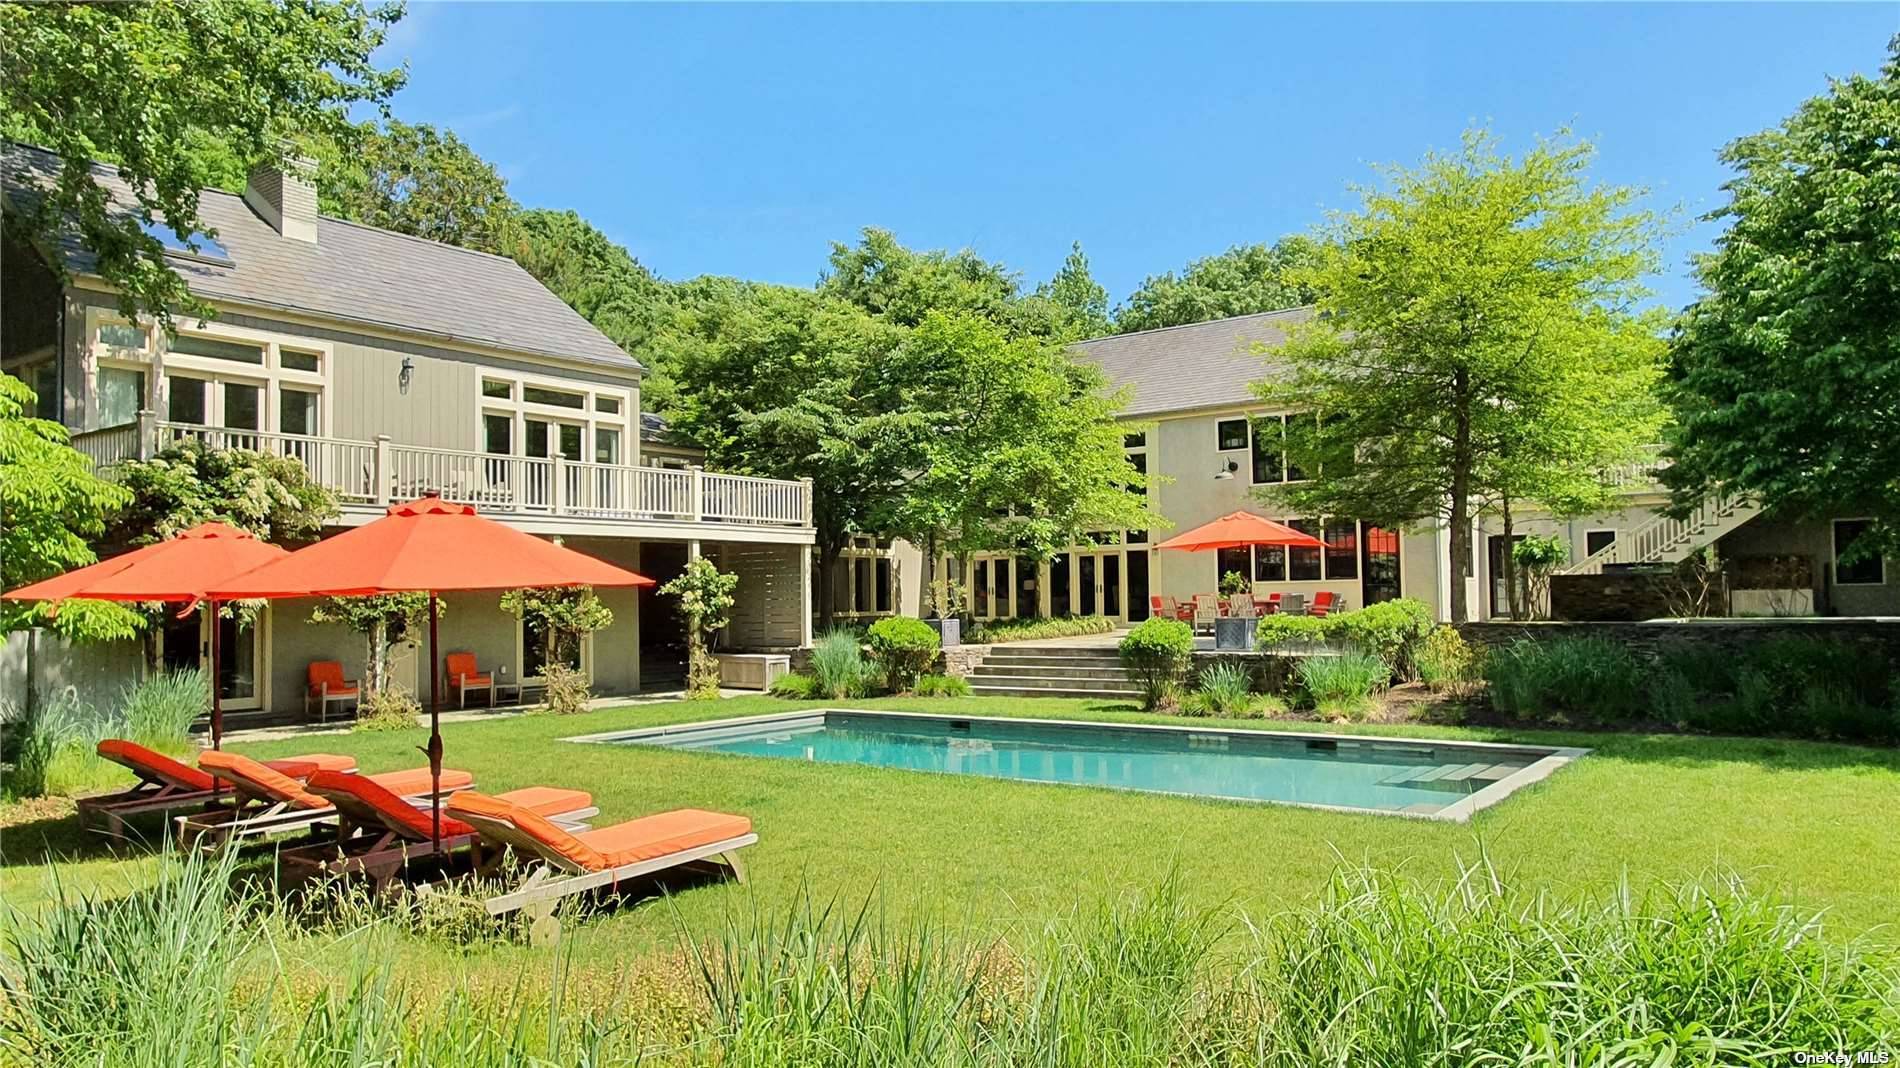 Minutes to East Hampton Village and beaches, down a long private drive on a beautifully landscaped 4 acre property is this extraordinary modern compound consisting of a main residence, very ...